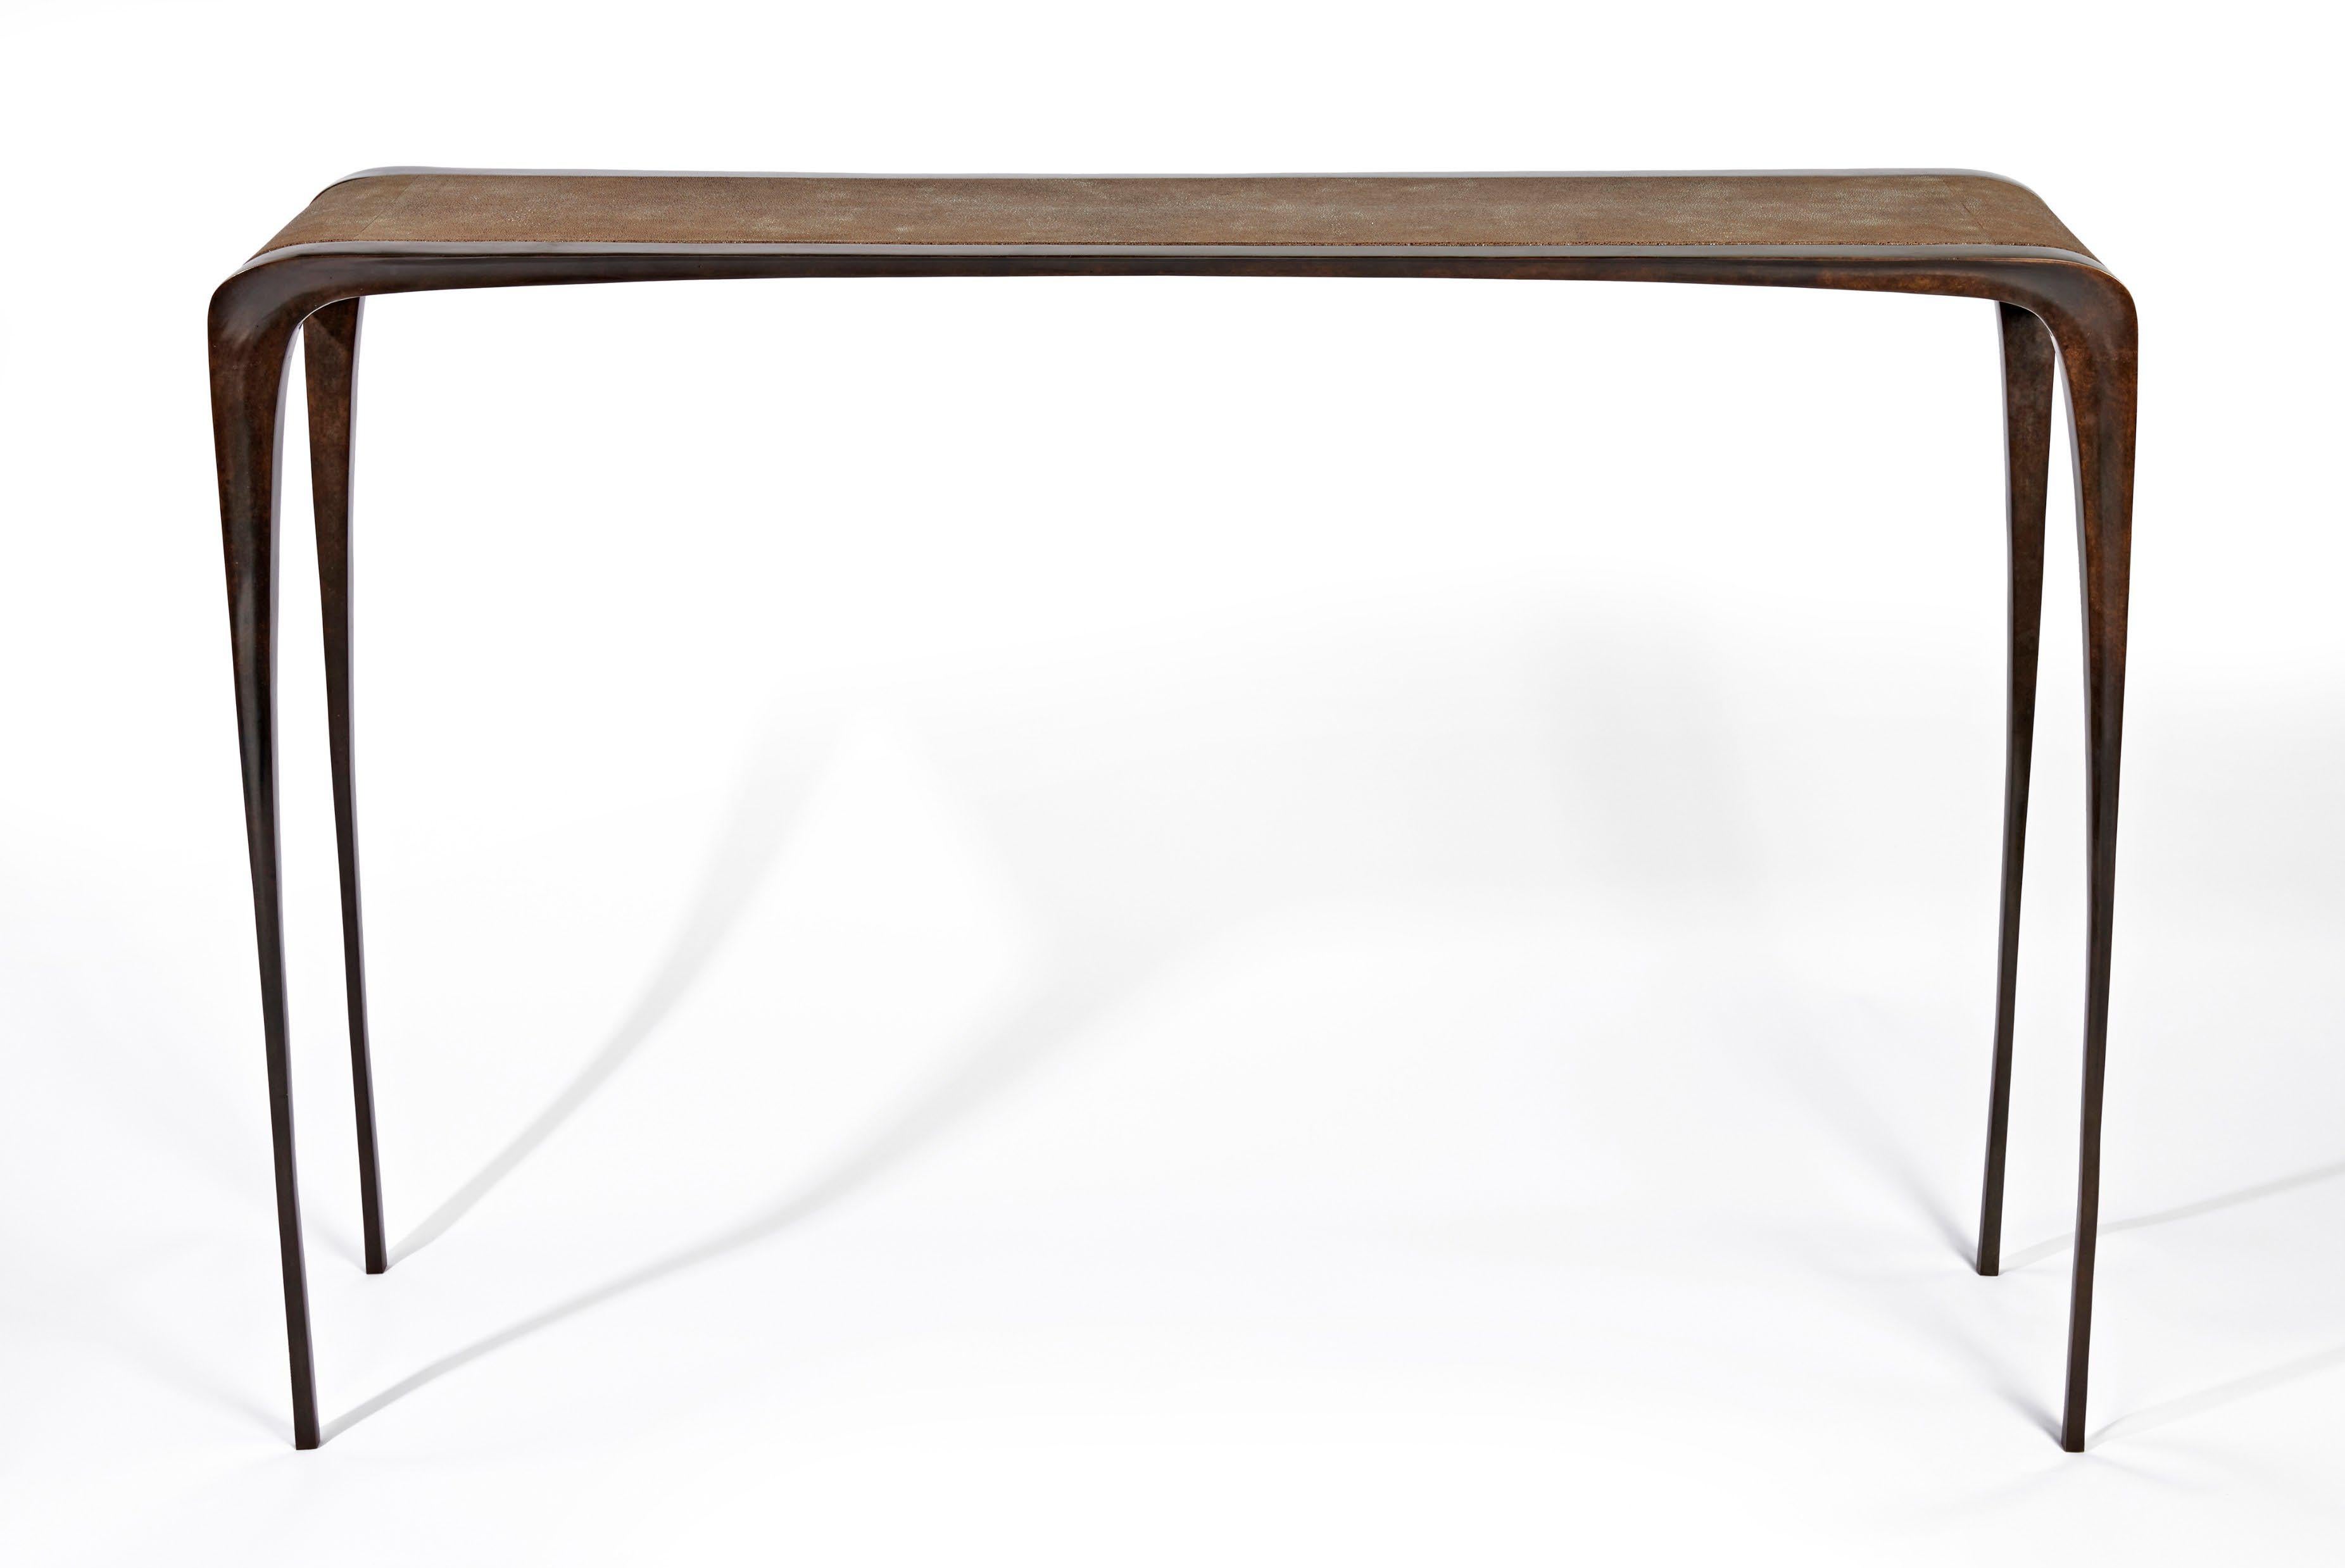 From the 2023 exclusive collection by Anasthasia Millot for Valerie Goodman Gallery.
A sober and chic console in bronze and a shagreen print leather top.
This console can be ordered with custom dimensions and finishes.

Anasthasia Millot’s new